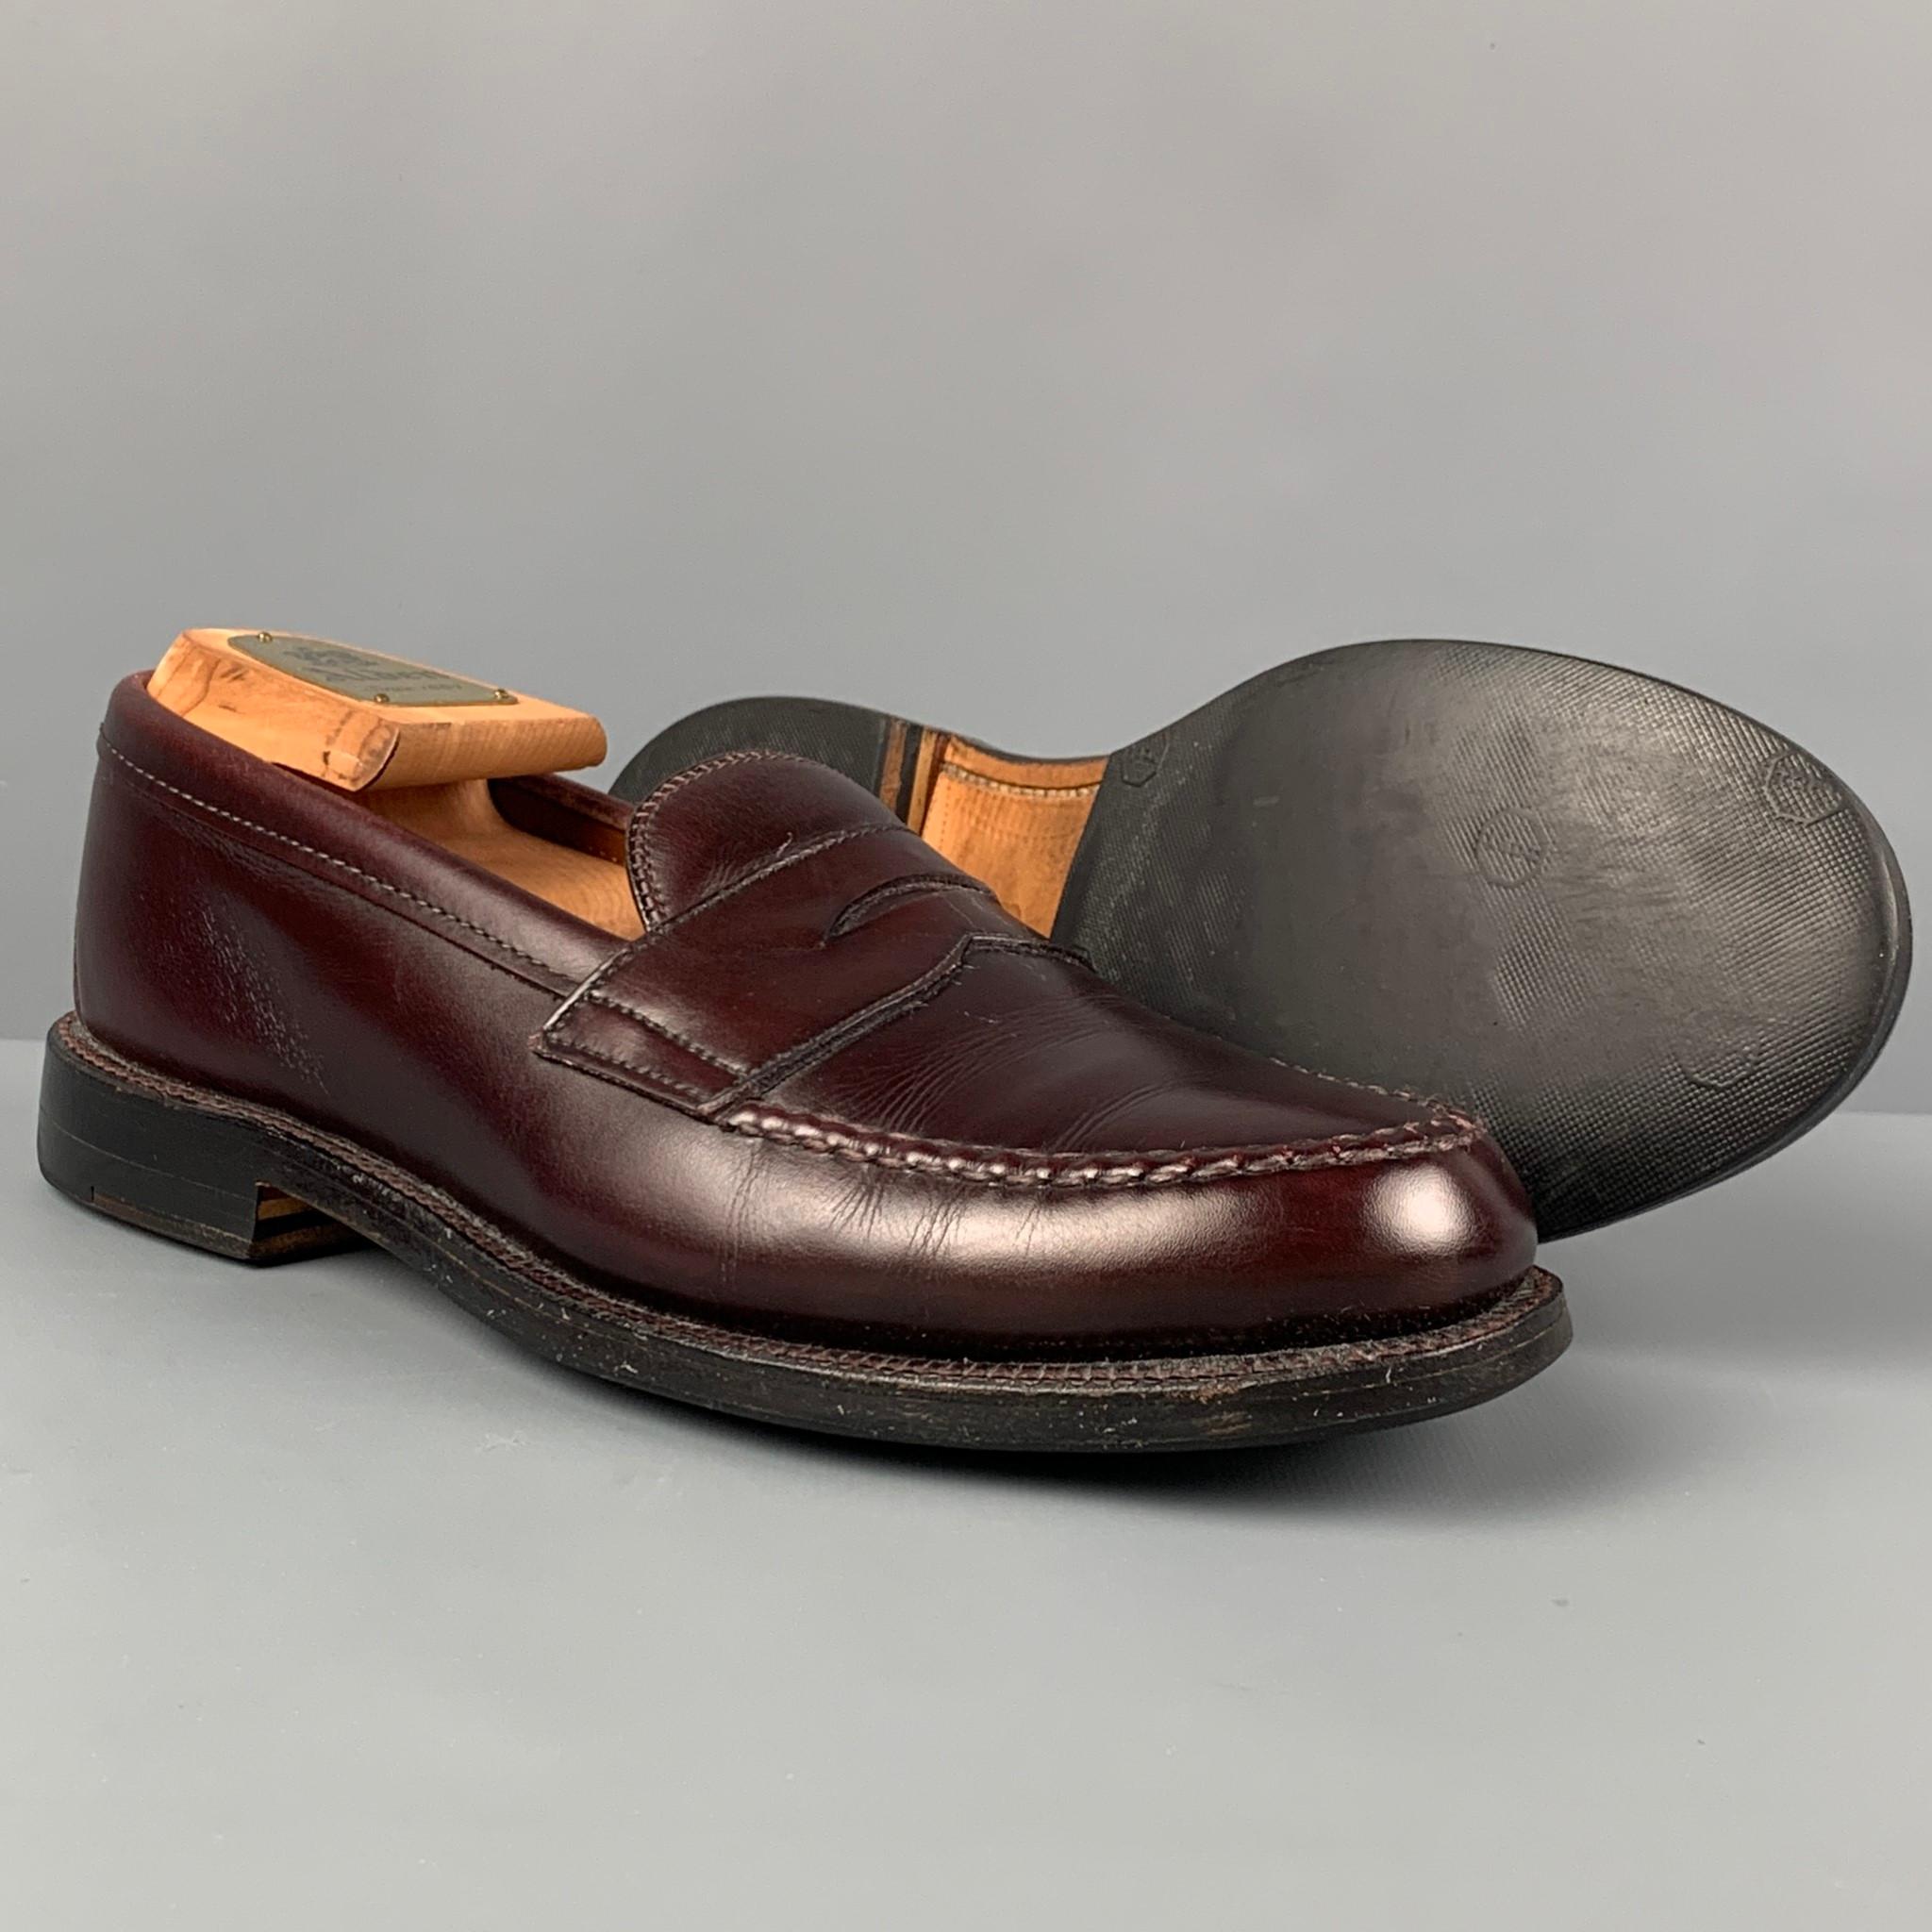 ALDEN loafers comes in a burgundy leather featuring a slip on style and a penny strap detail. Comes with box and shoes trees. Made in USA. 

Very Good Pre-Owned Condition.
Marked: 6.5 B/D 8C10 021 984

Outsole: 11 in. x 4 in. 